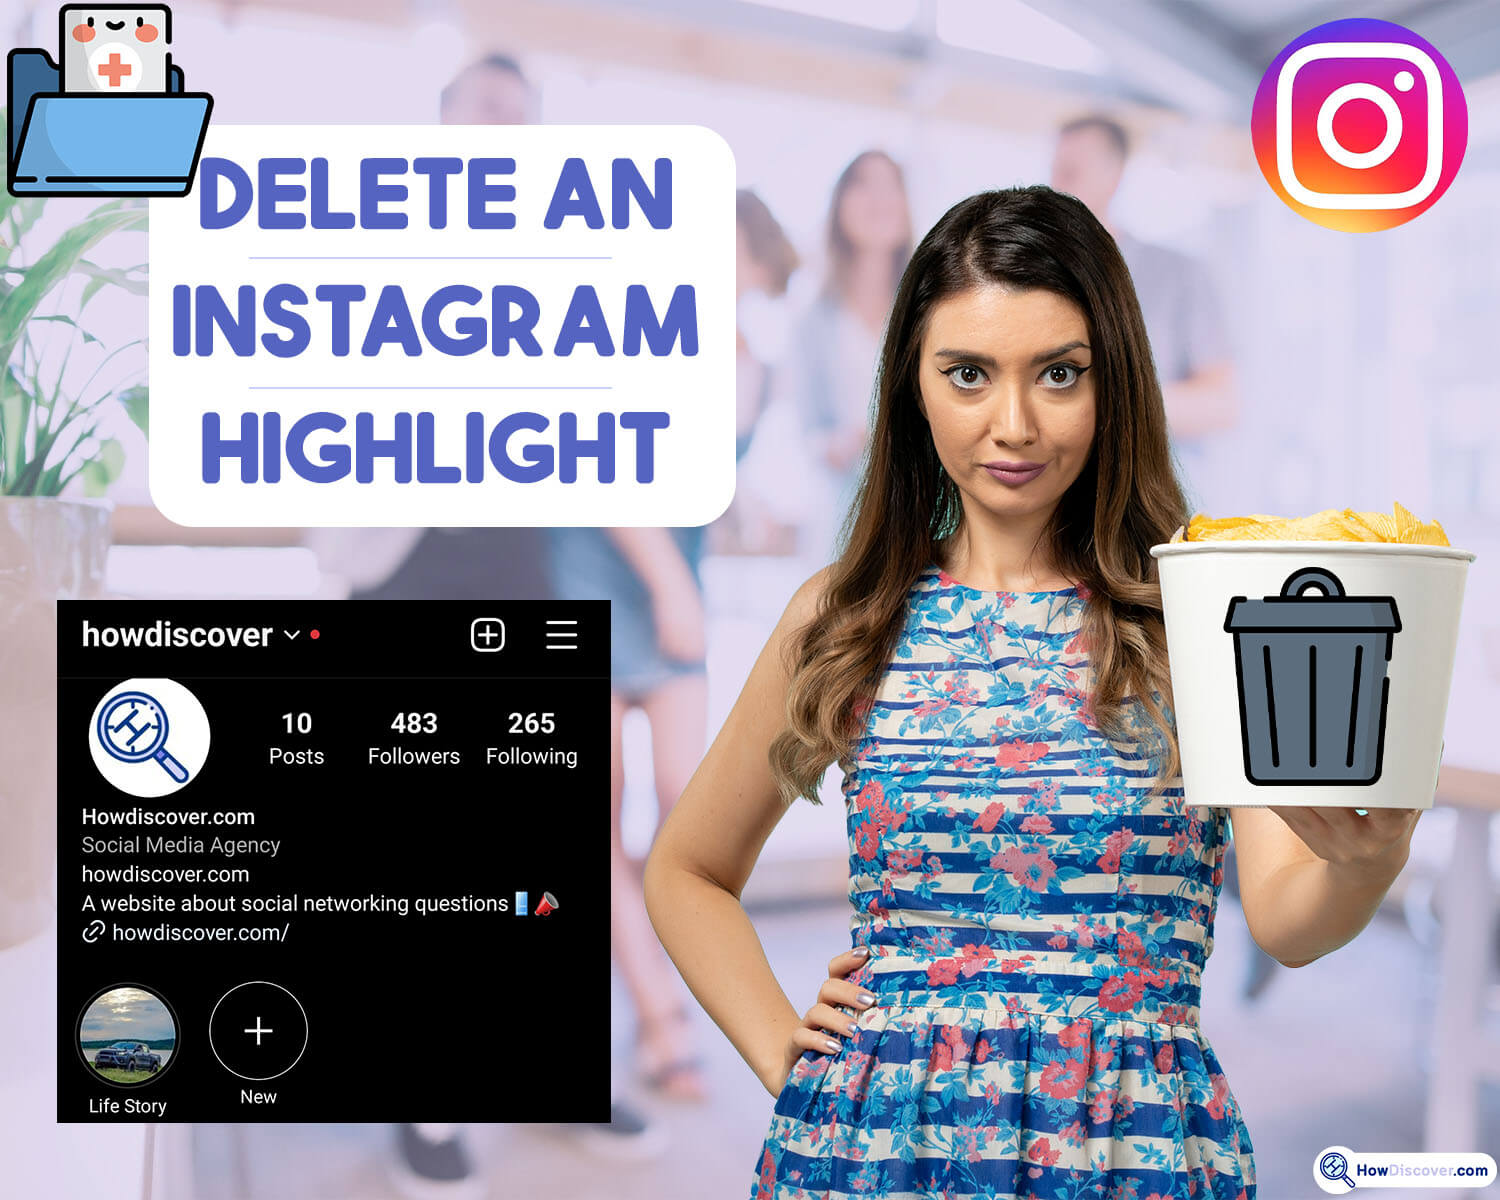 How To Delete Highlights On Instagram - Step-by-step guide on how to delete an Instagram highlight